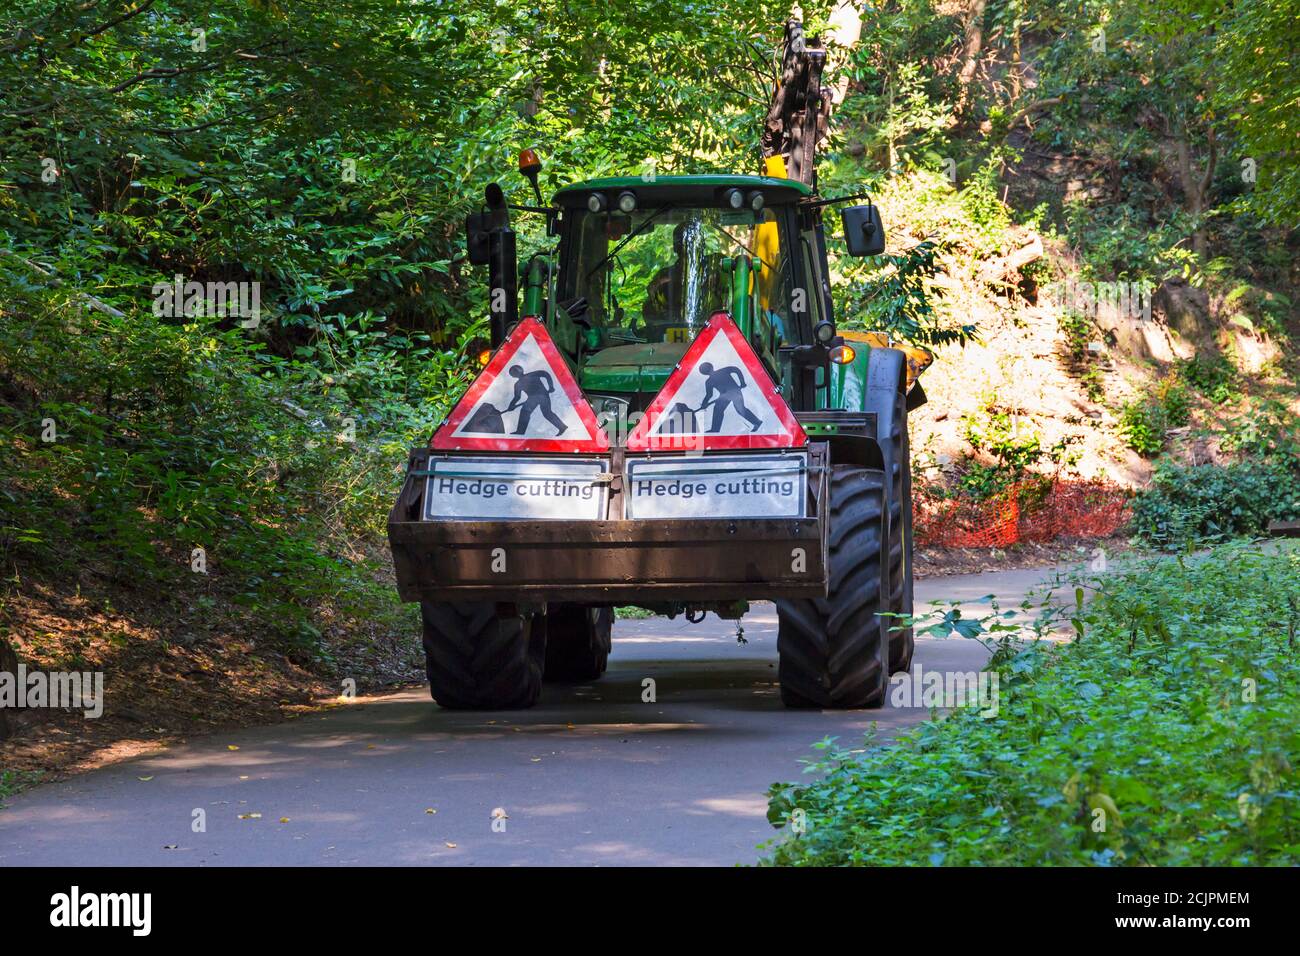 McConnel hedge cutter with hedge cutting signs on display driving through the chine at Alum Chine, Bournemouth, Dorset UK in September Stock Photo